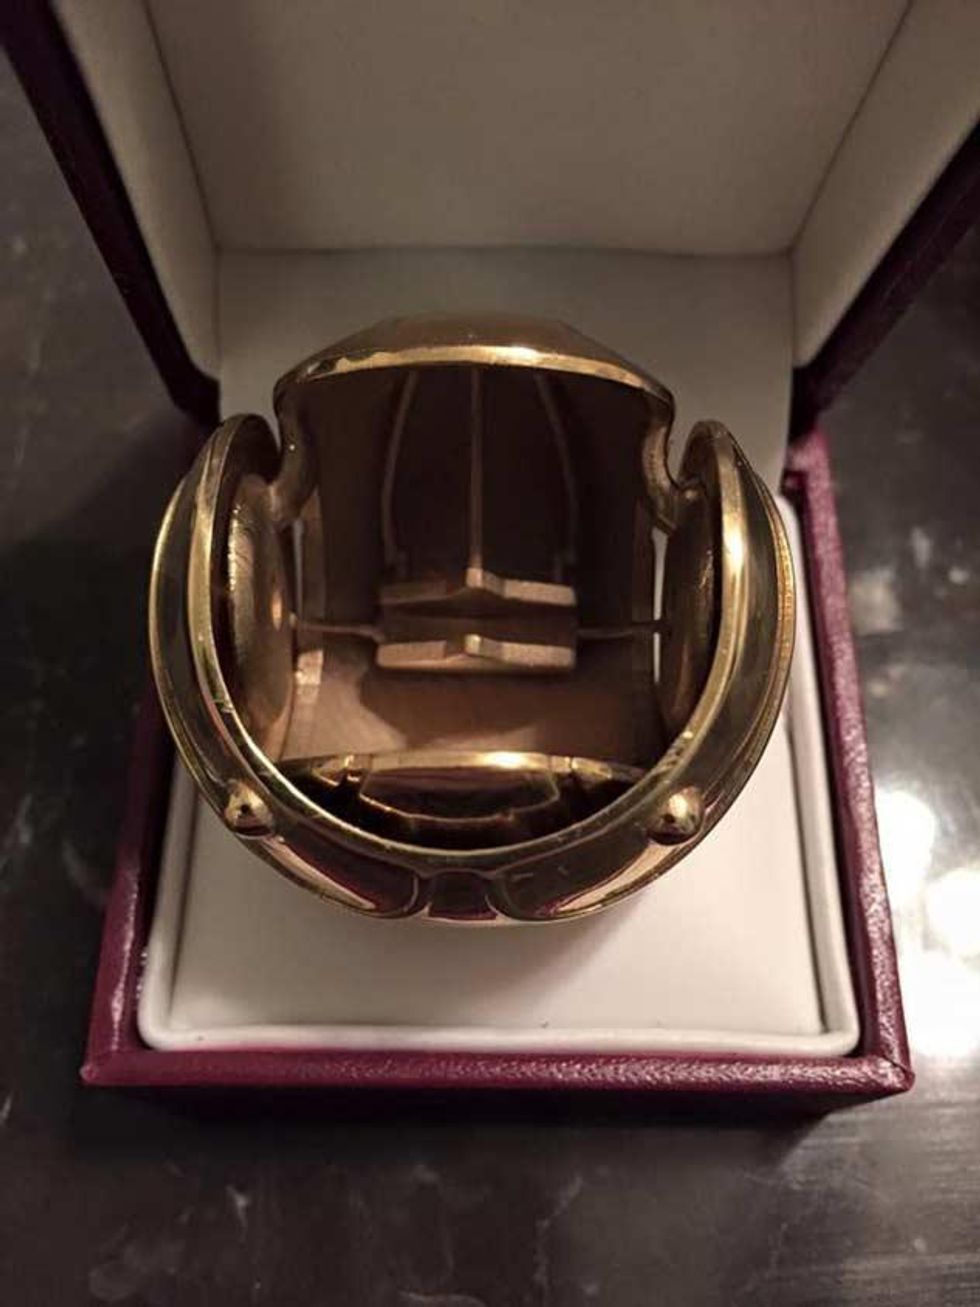 This is a photo of a Golden Snitch ring box. 